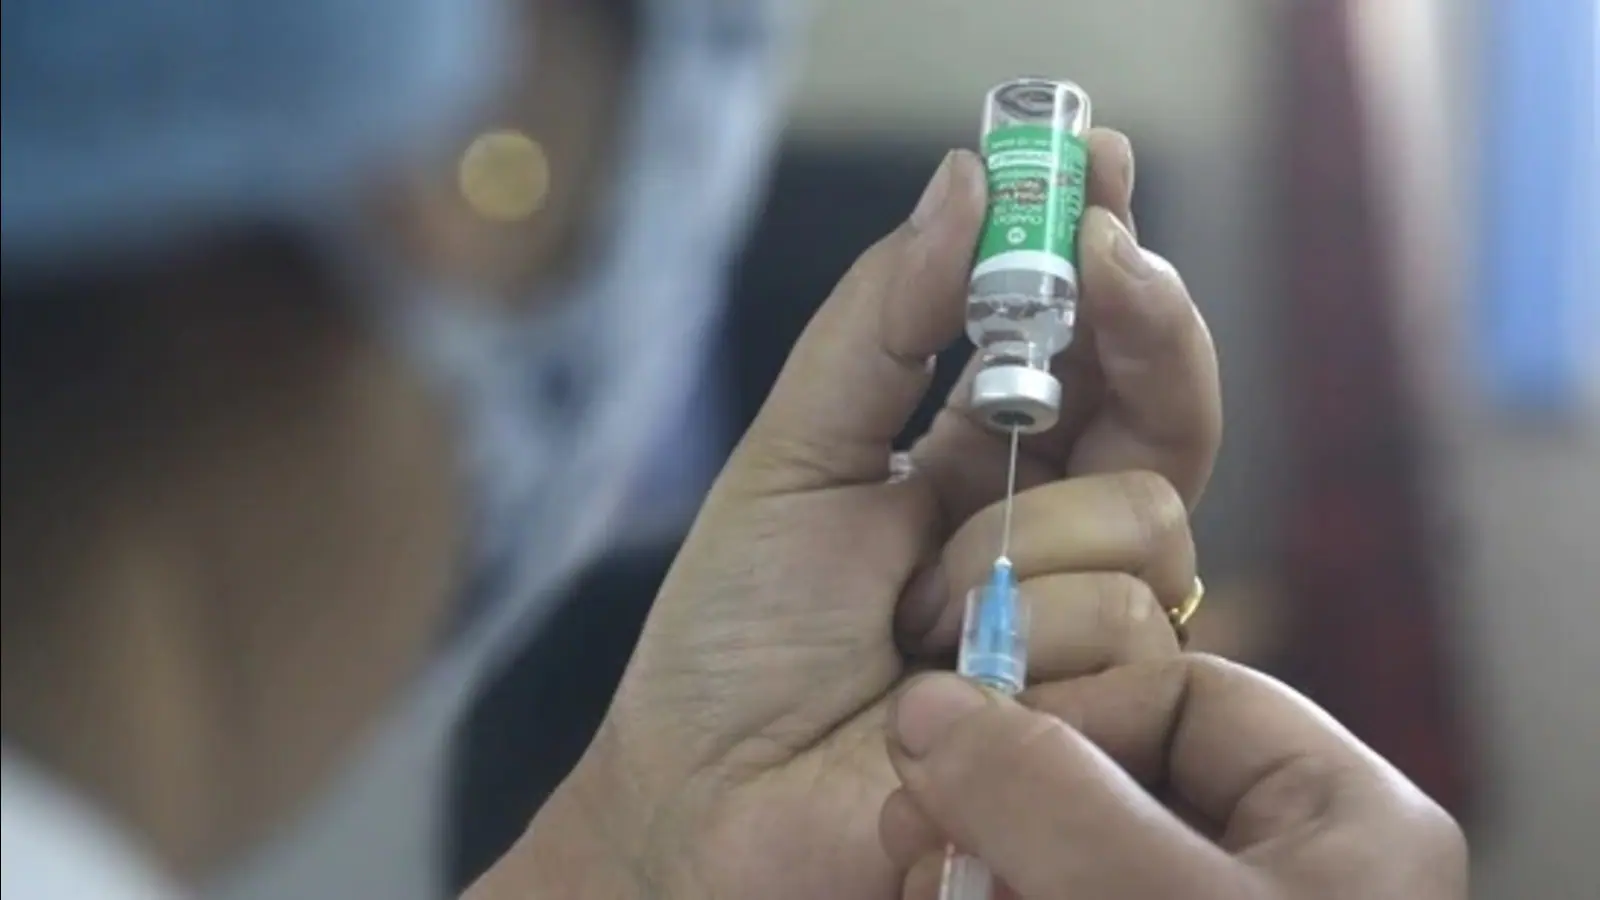 Booster dose of Covid vaccine a must: Experts